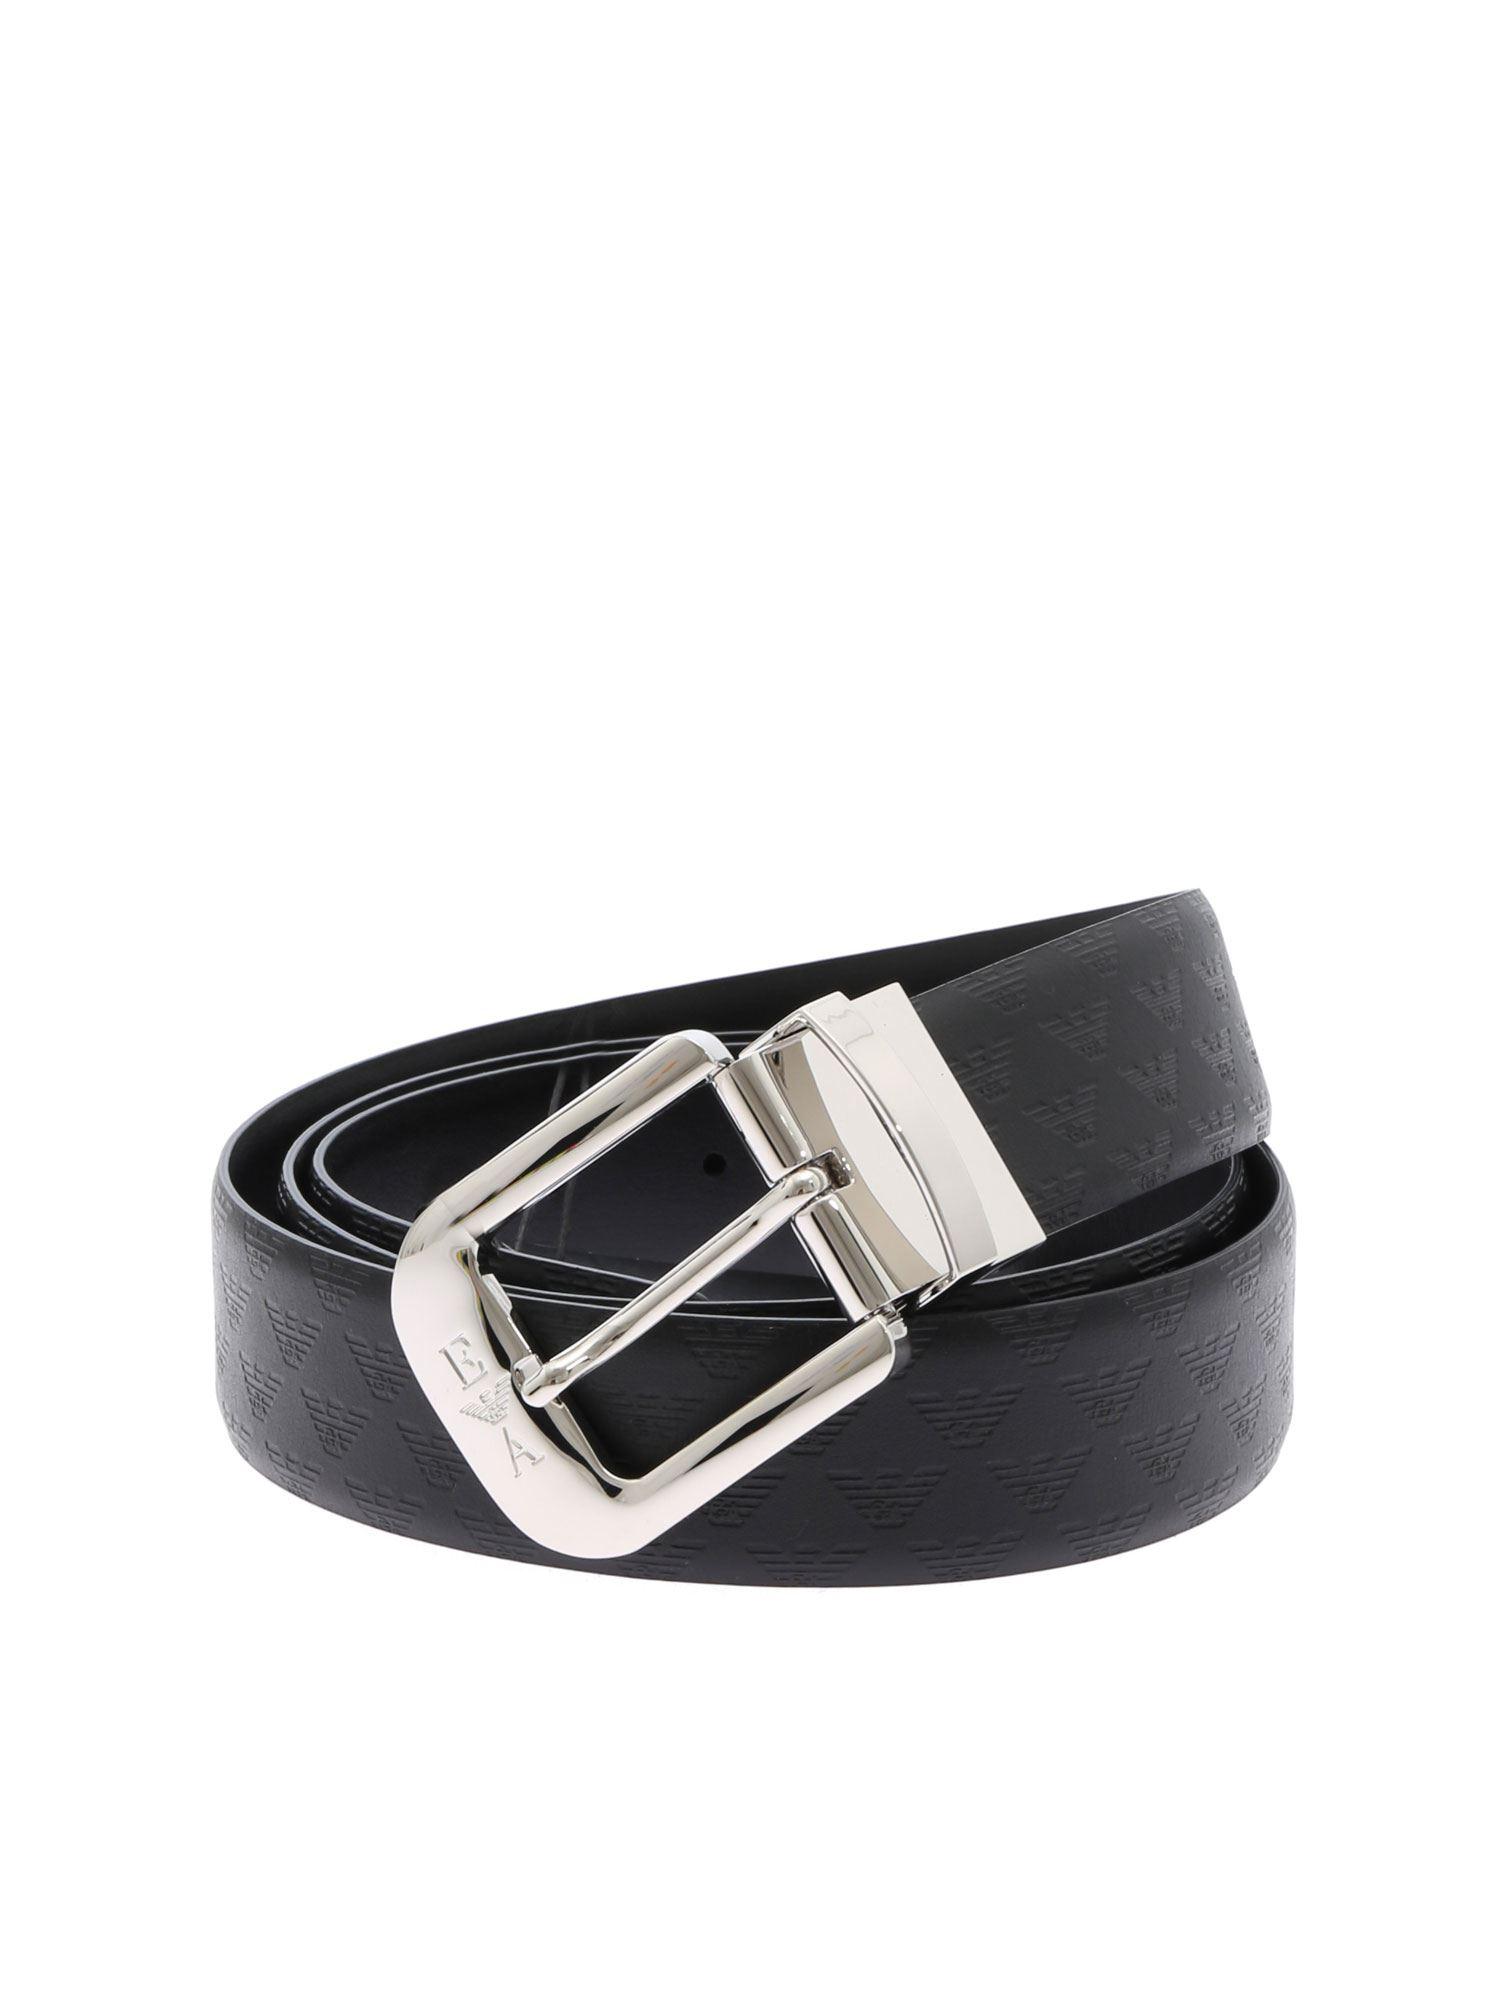 Emporio Armani Leather Black Belt With Eagle Logo for Men - Lyst